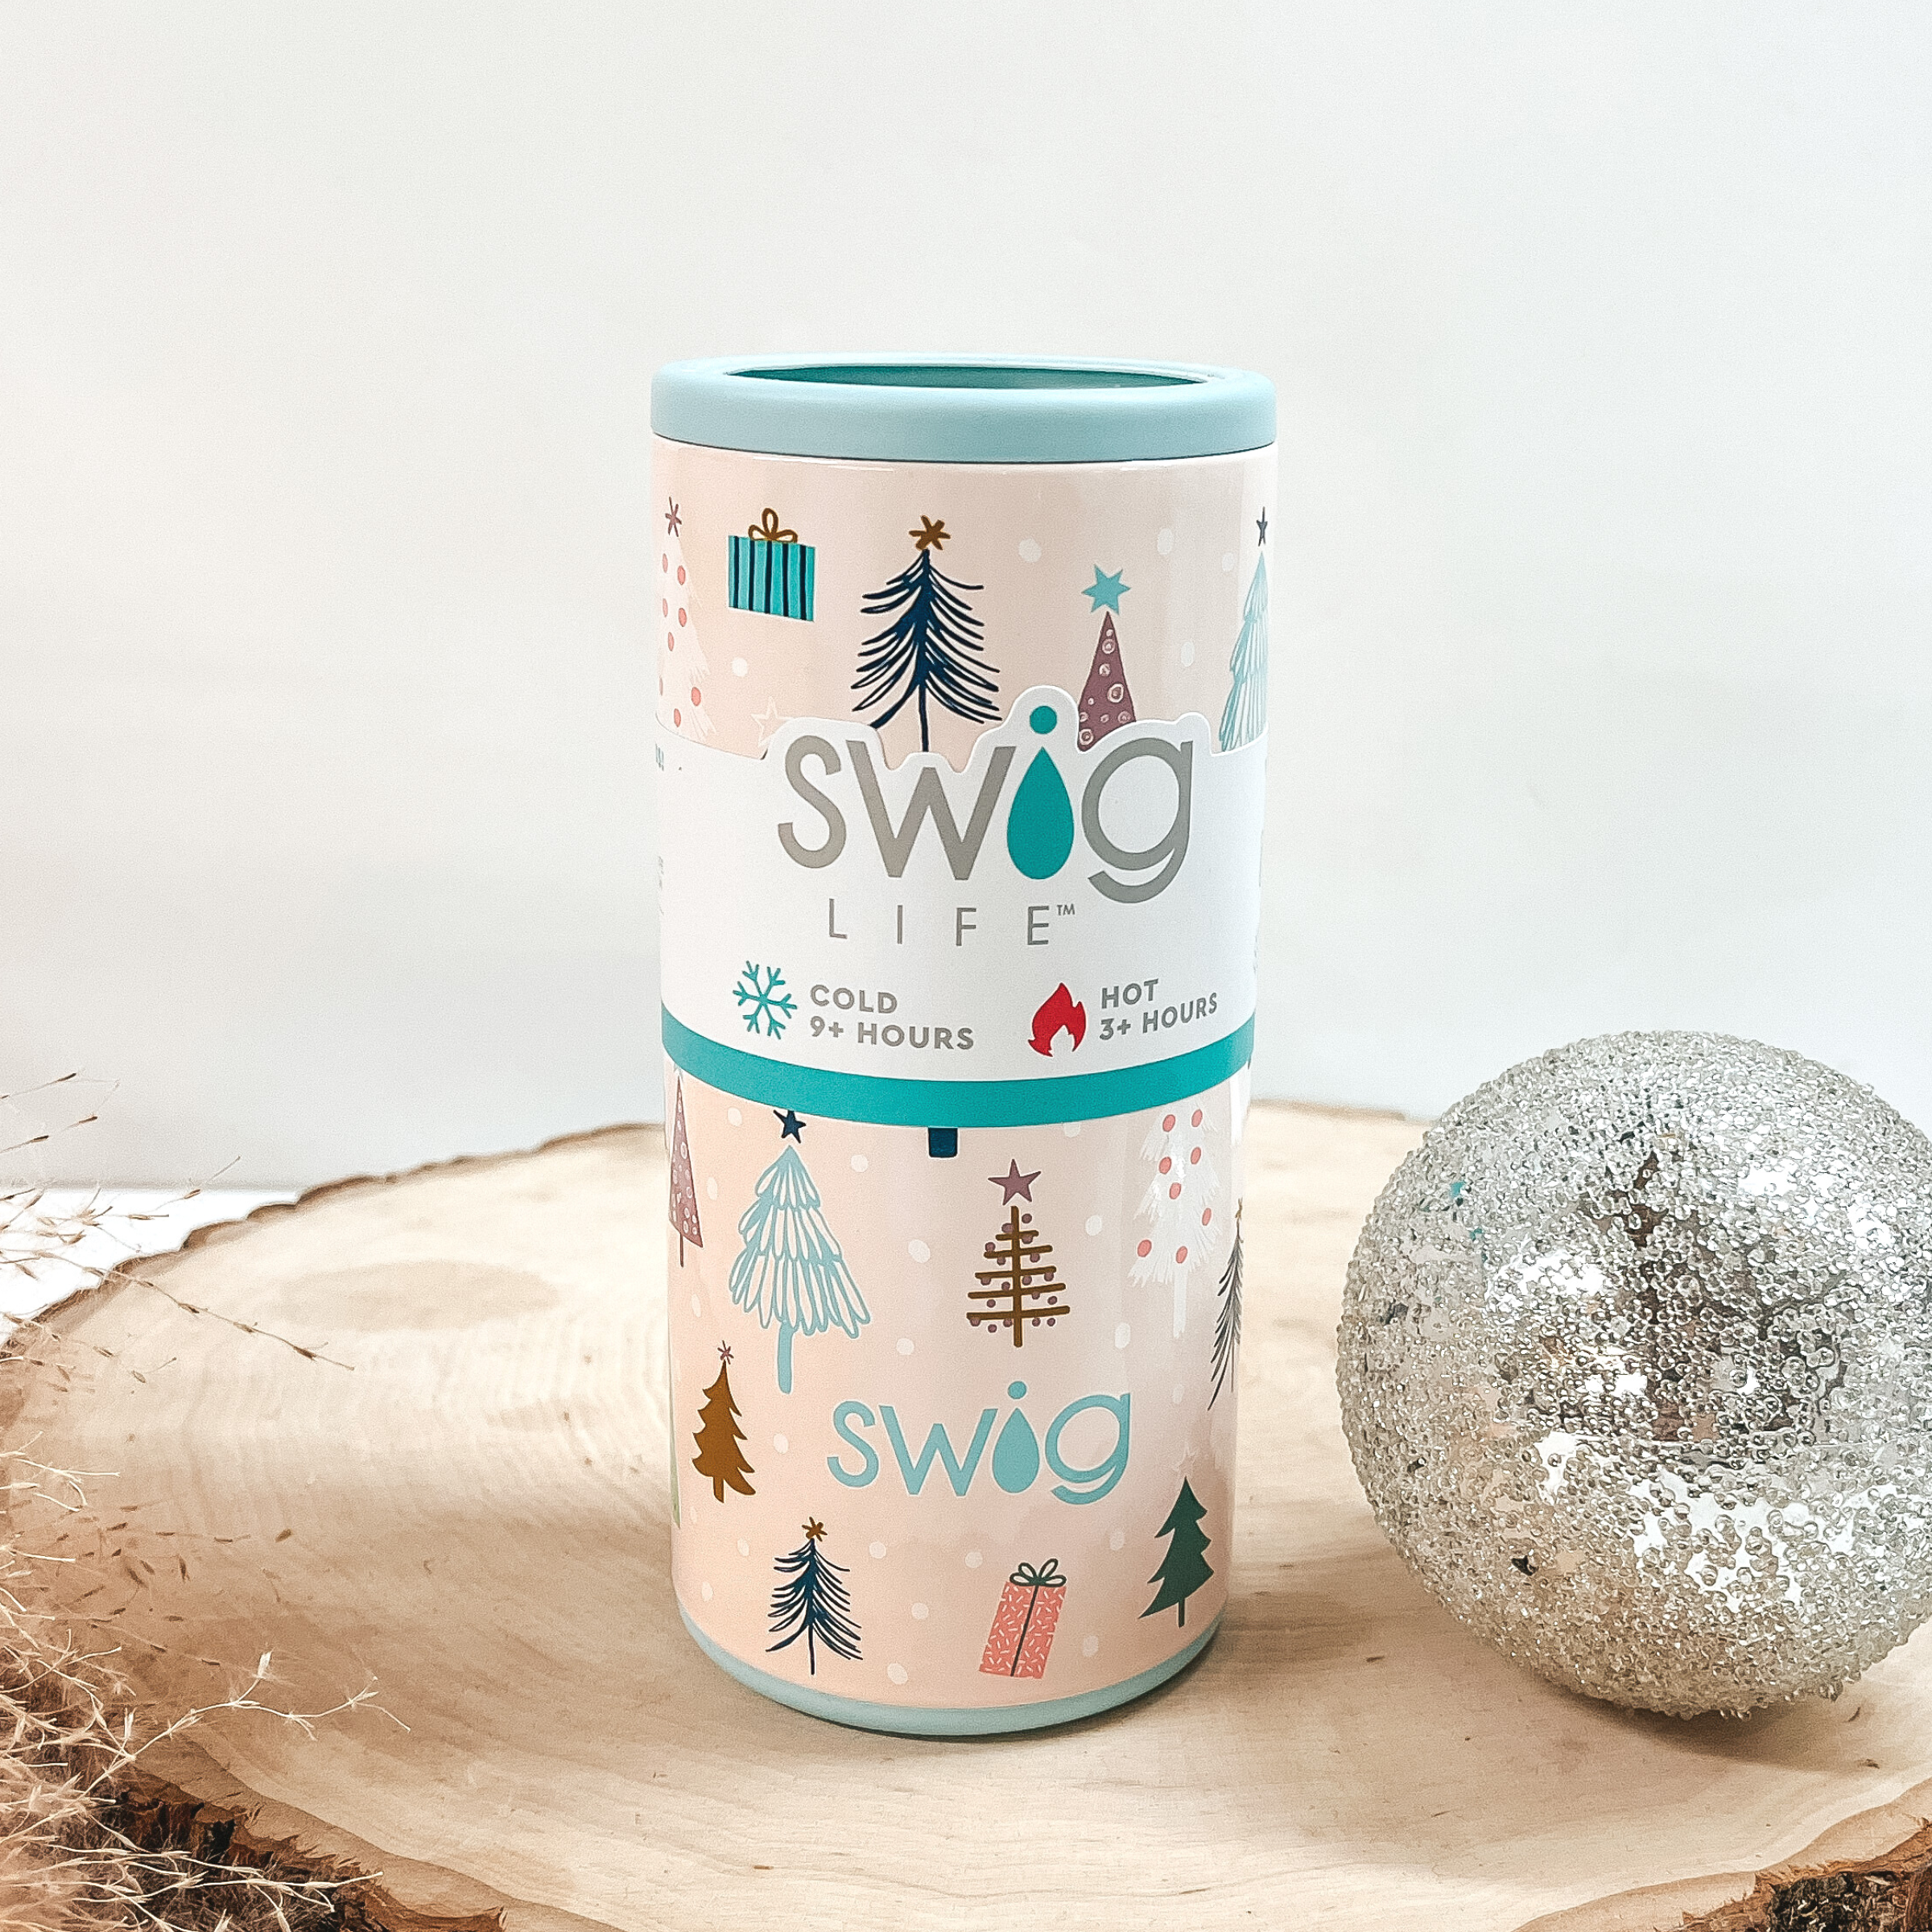 Swig Life - Load up your sleigh with holiday goodies galore — like our new  Hollydays collection in fan-favorite shapes 🎄❄⛄ #takeaswig Now available  to shop at the link below! www.swiglife.com/collections/holiday